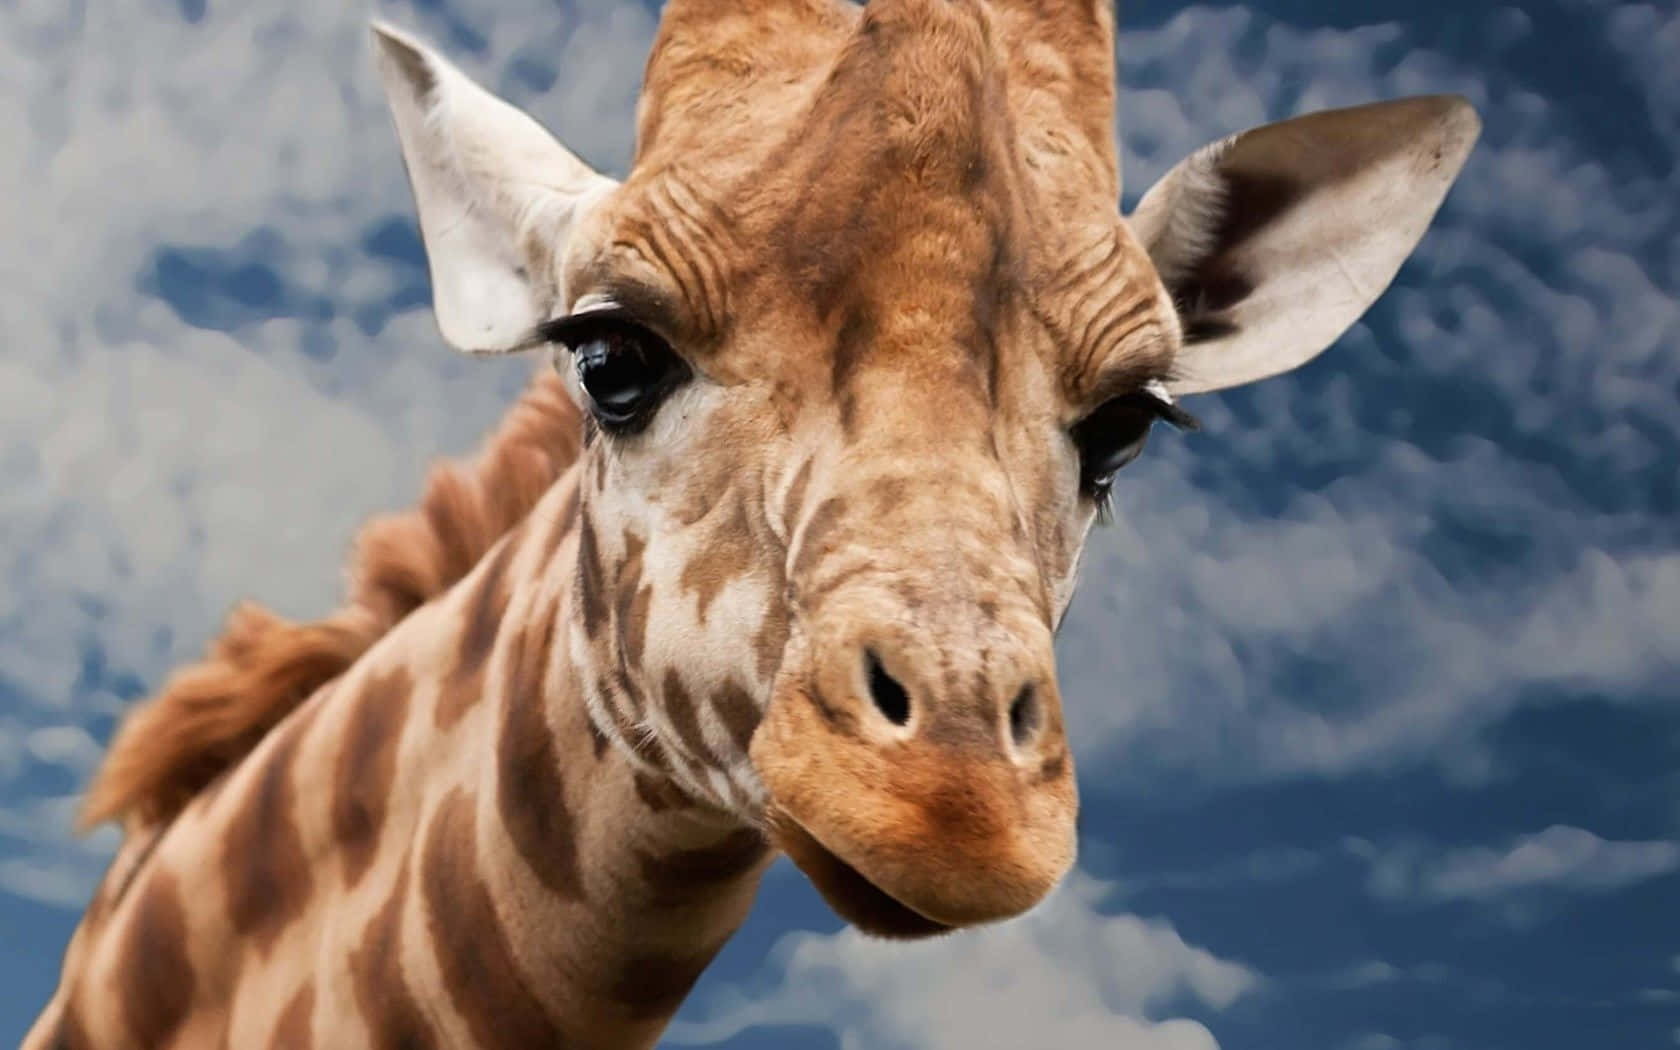 Fun and Fabulous: This Giraffe is Up for Anything! Wallpaper